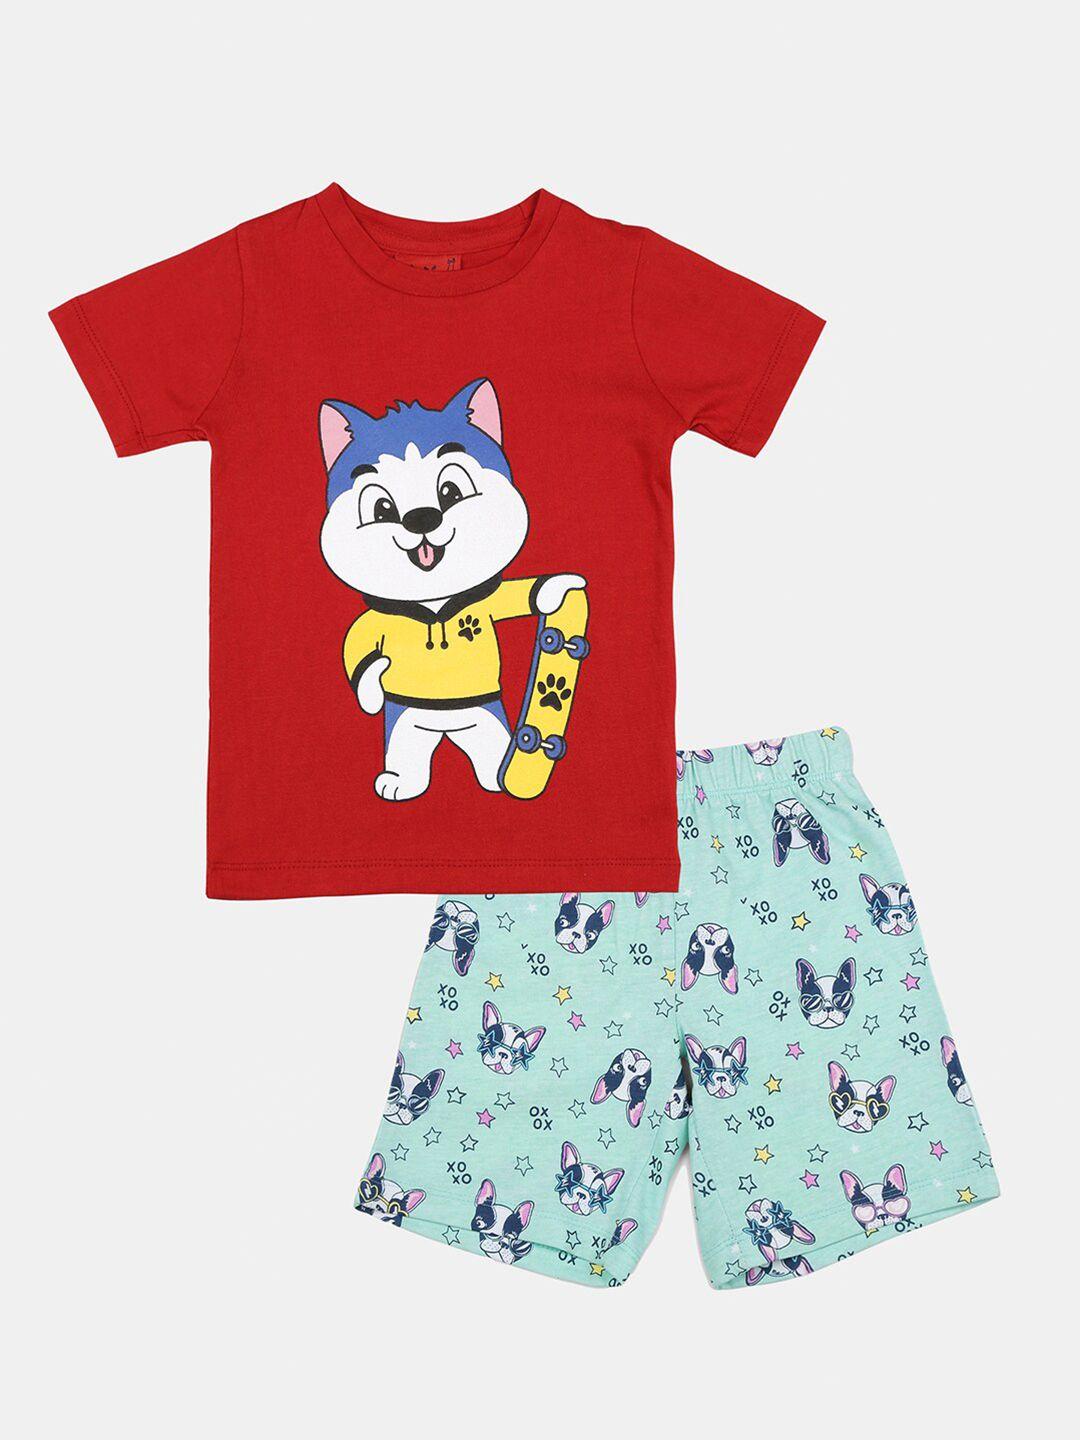 wyld sprog boys red & blue graphic printed printed pure cotton t-shirt shorts clothing set